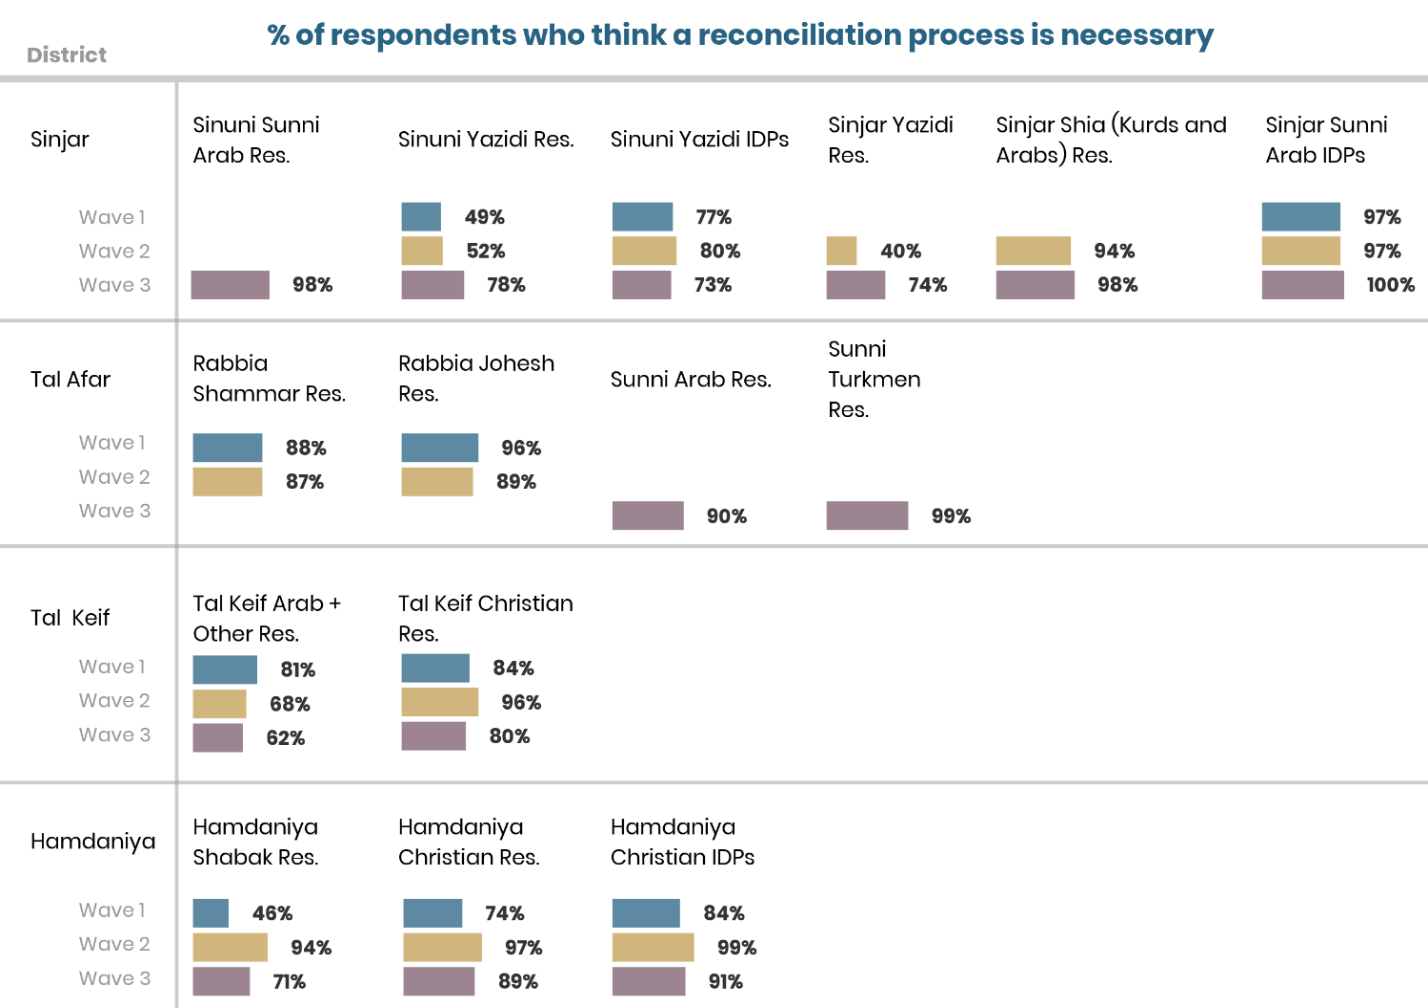 CSMF data demonstrates that reconciliation is needed